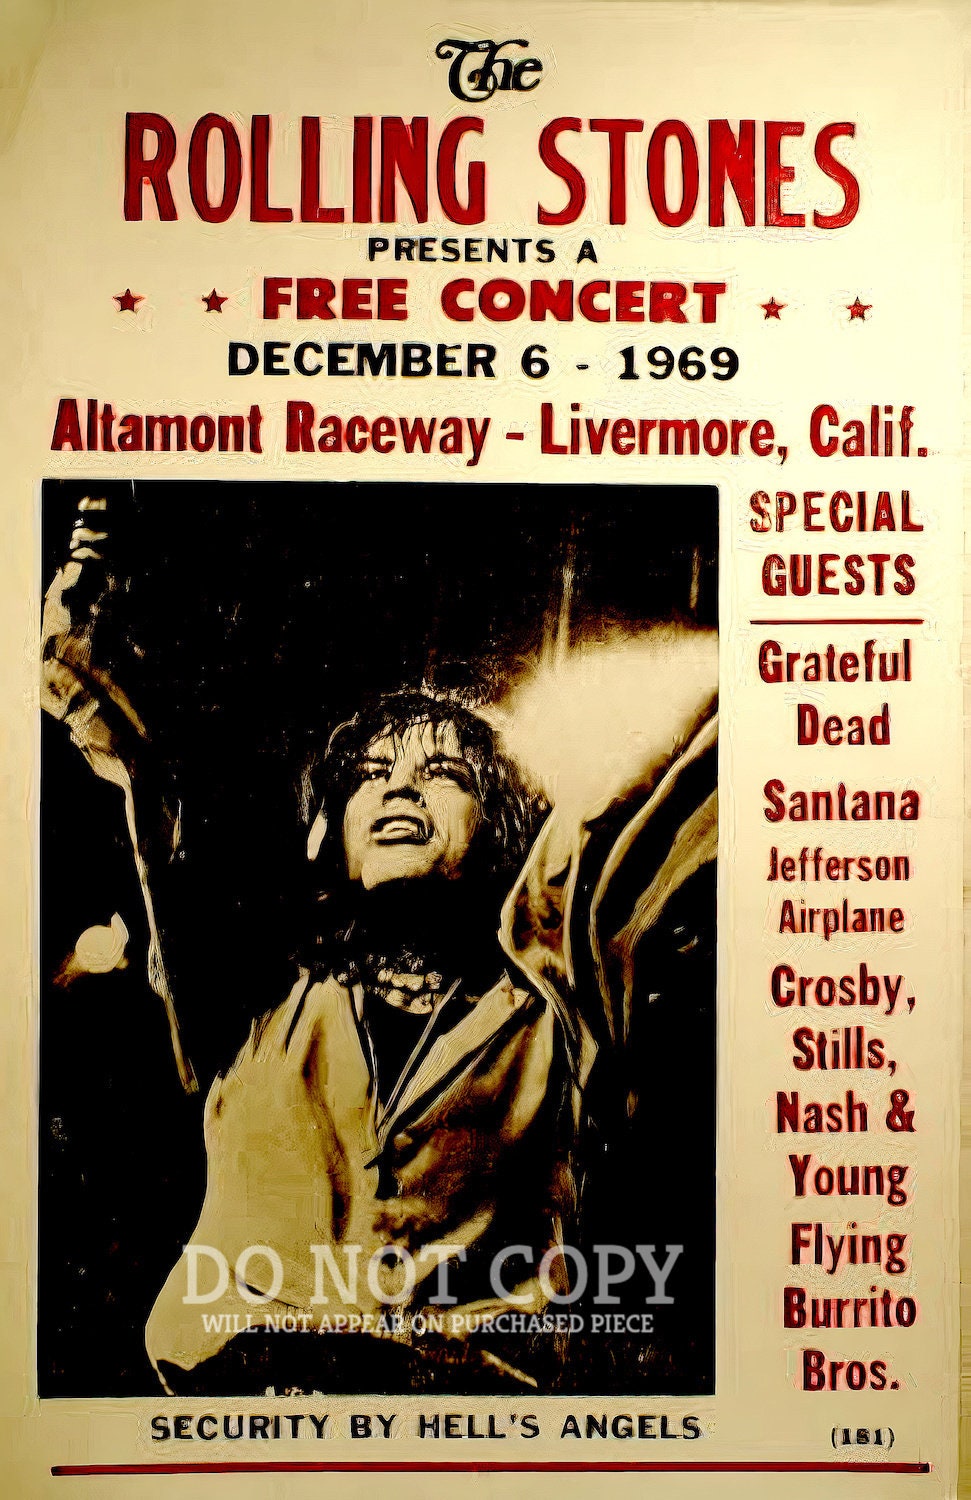 The Stones Altamont Concert Poster 11 X 17 - Legendary 1969 Music Festival  - Feat Most Incredible Rock